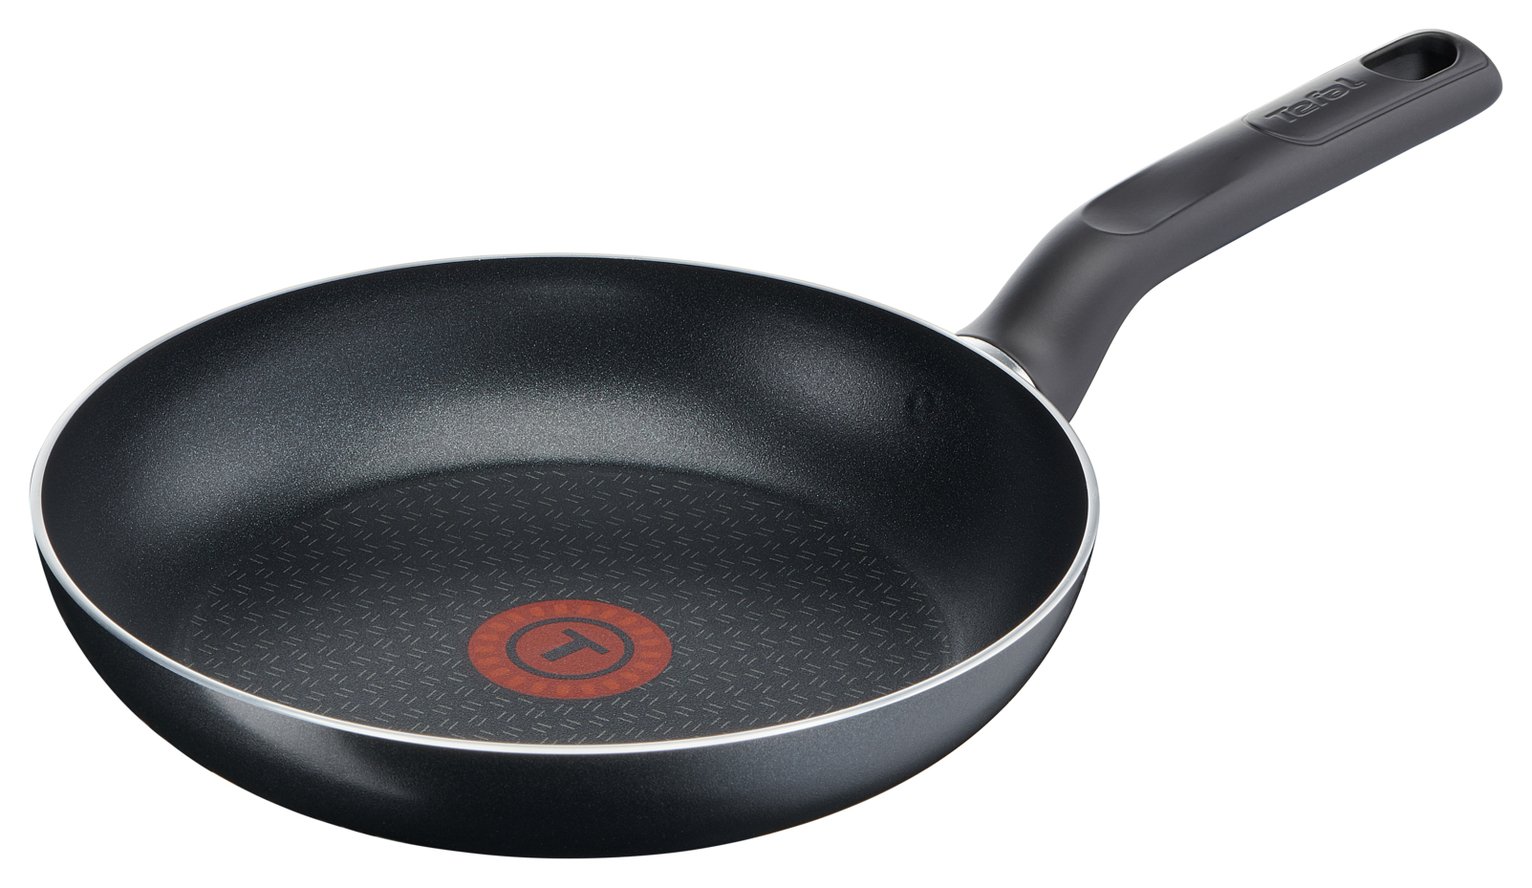 Tefal Superior Cook 24cm Non Stick Frying Pan